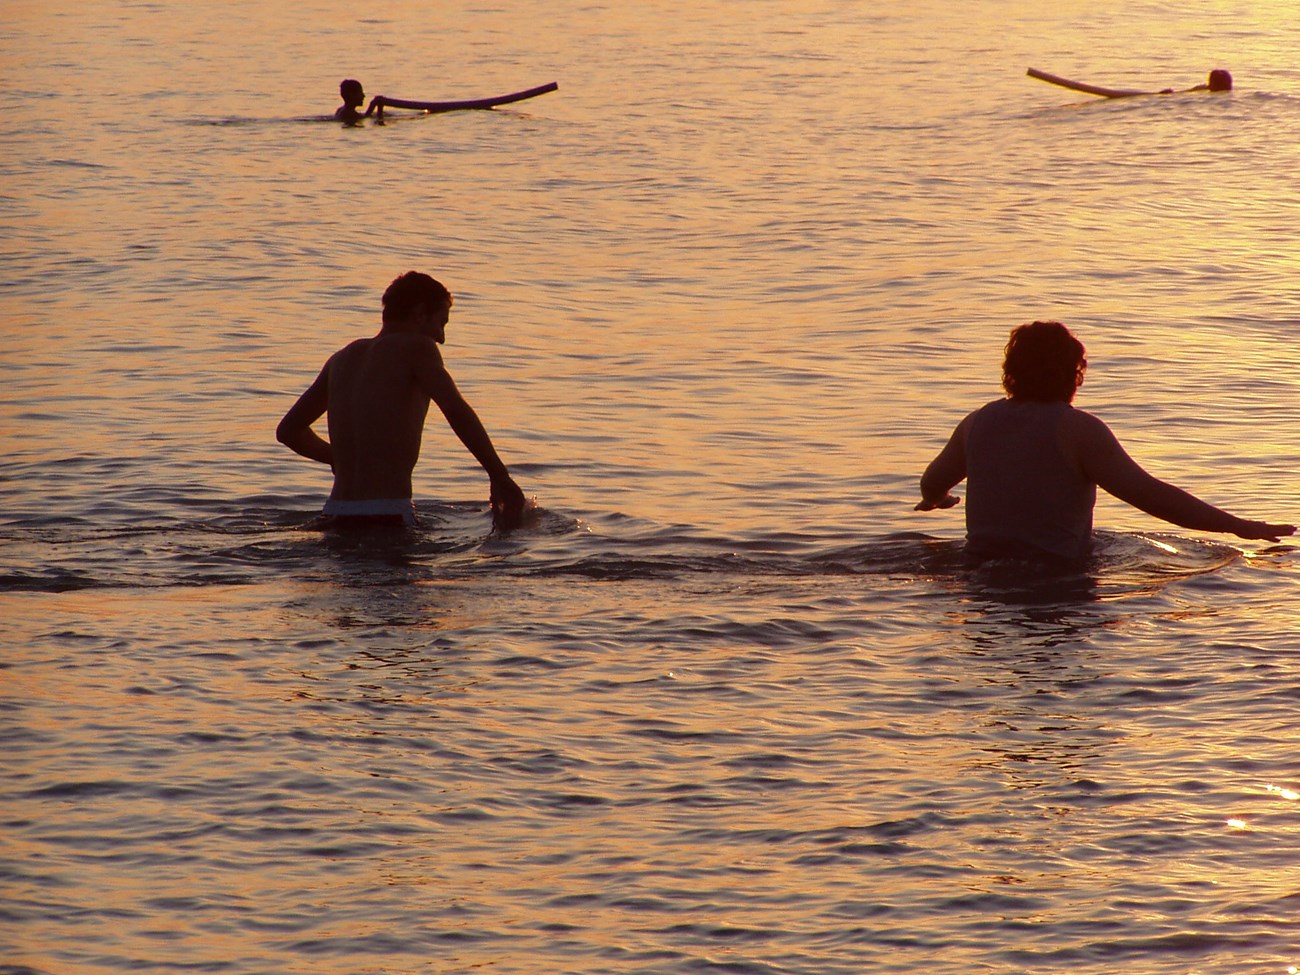 Swimmers in Lake Michigan at sunset.